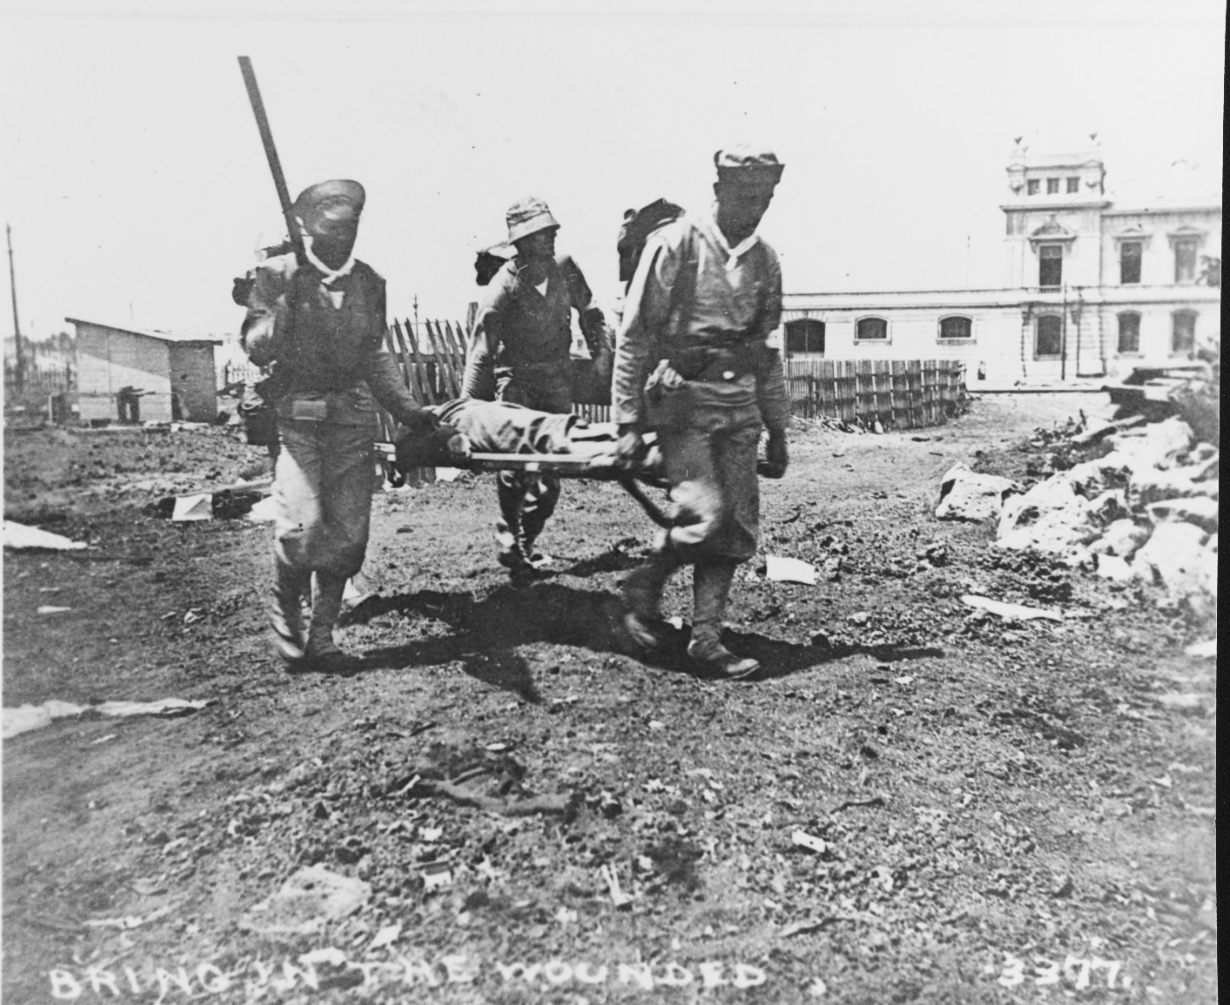 3 men in Navy uniforms carry a stretcher with a wounded person